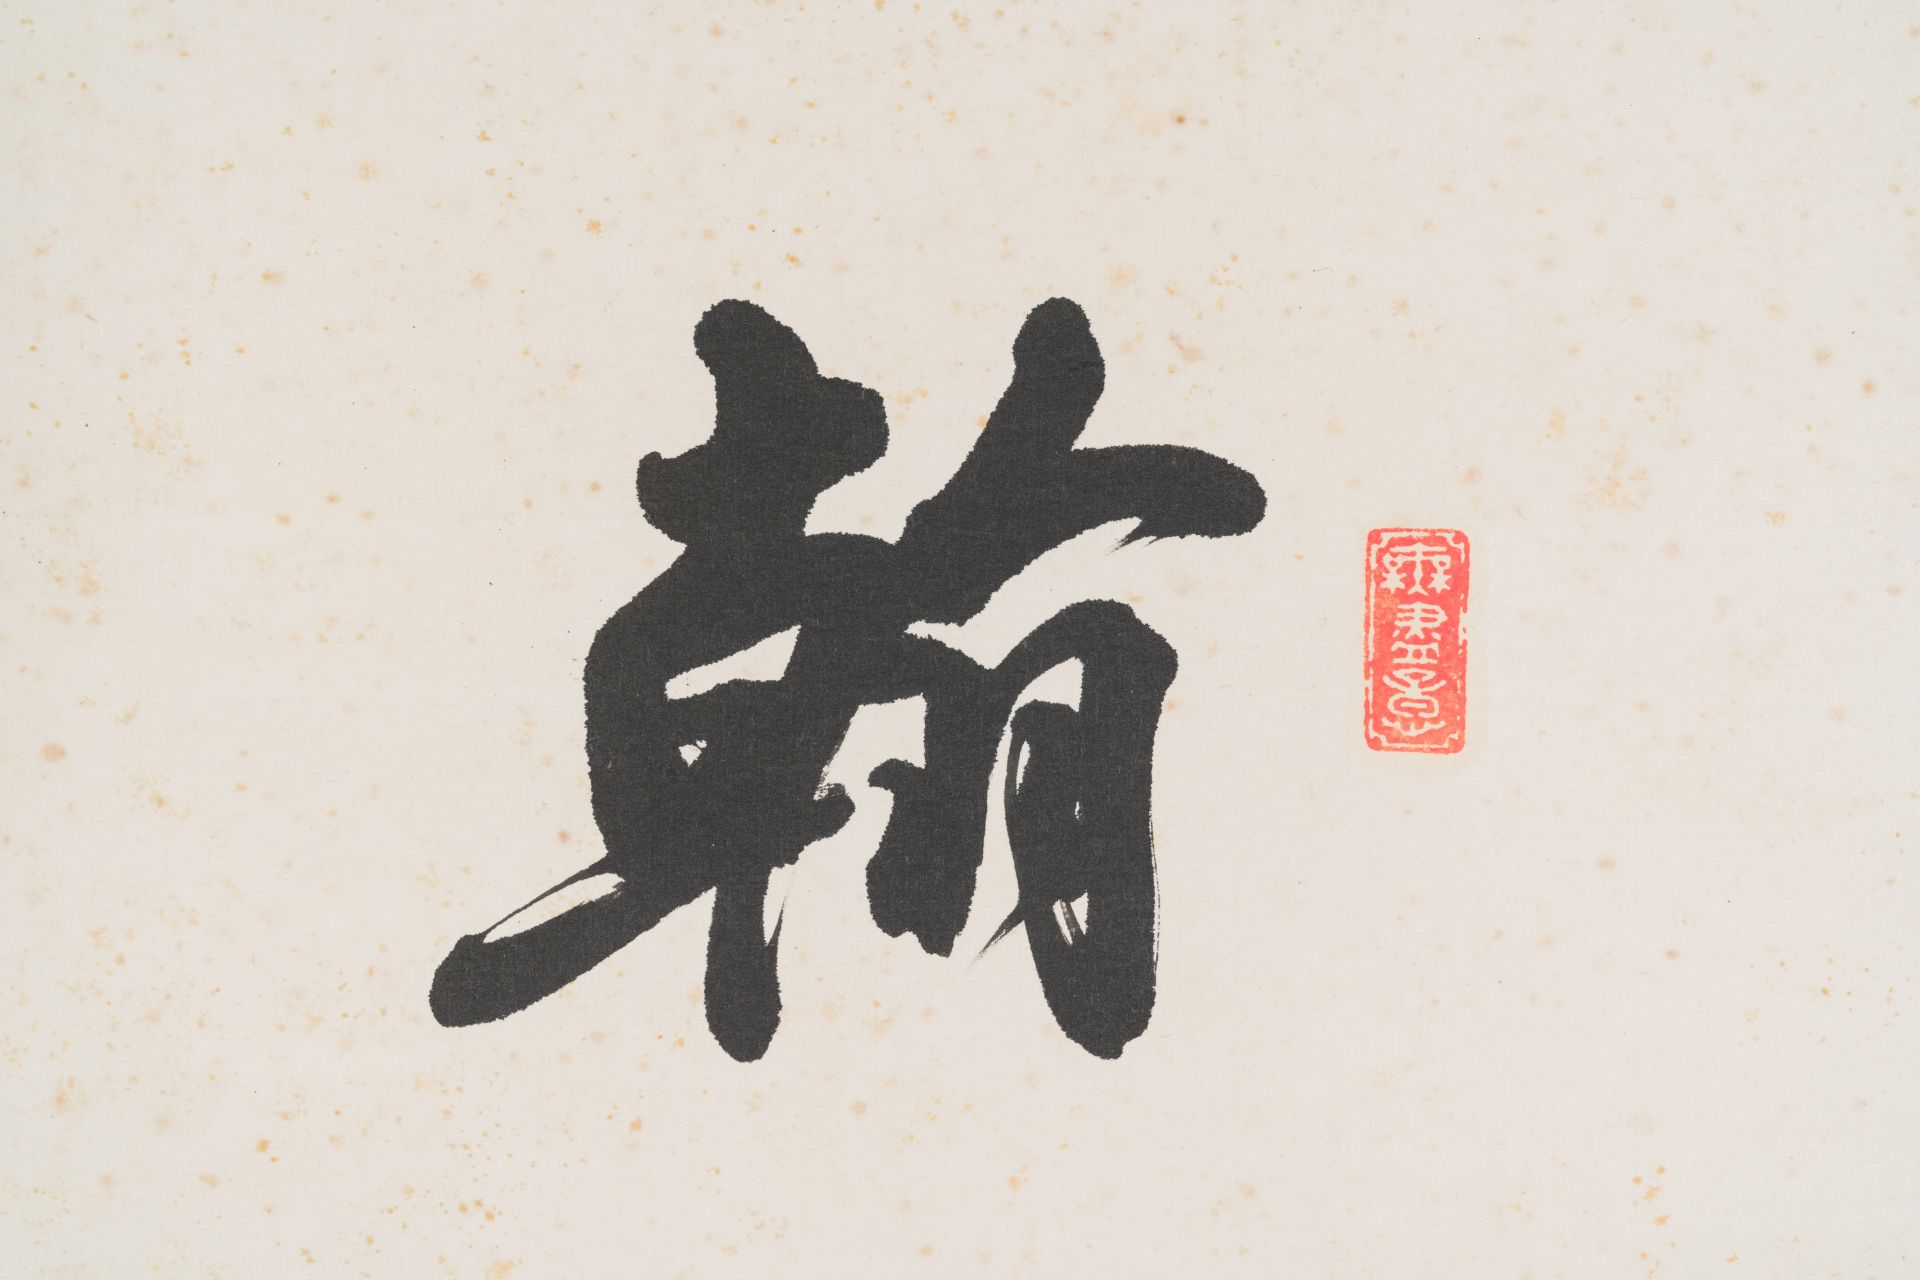 Zhao Puchu 趙樸初 (1907-2000): 'Calligraphy', ink on paper, dated 1982 - Image 3 of 4